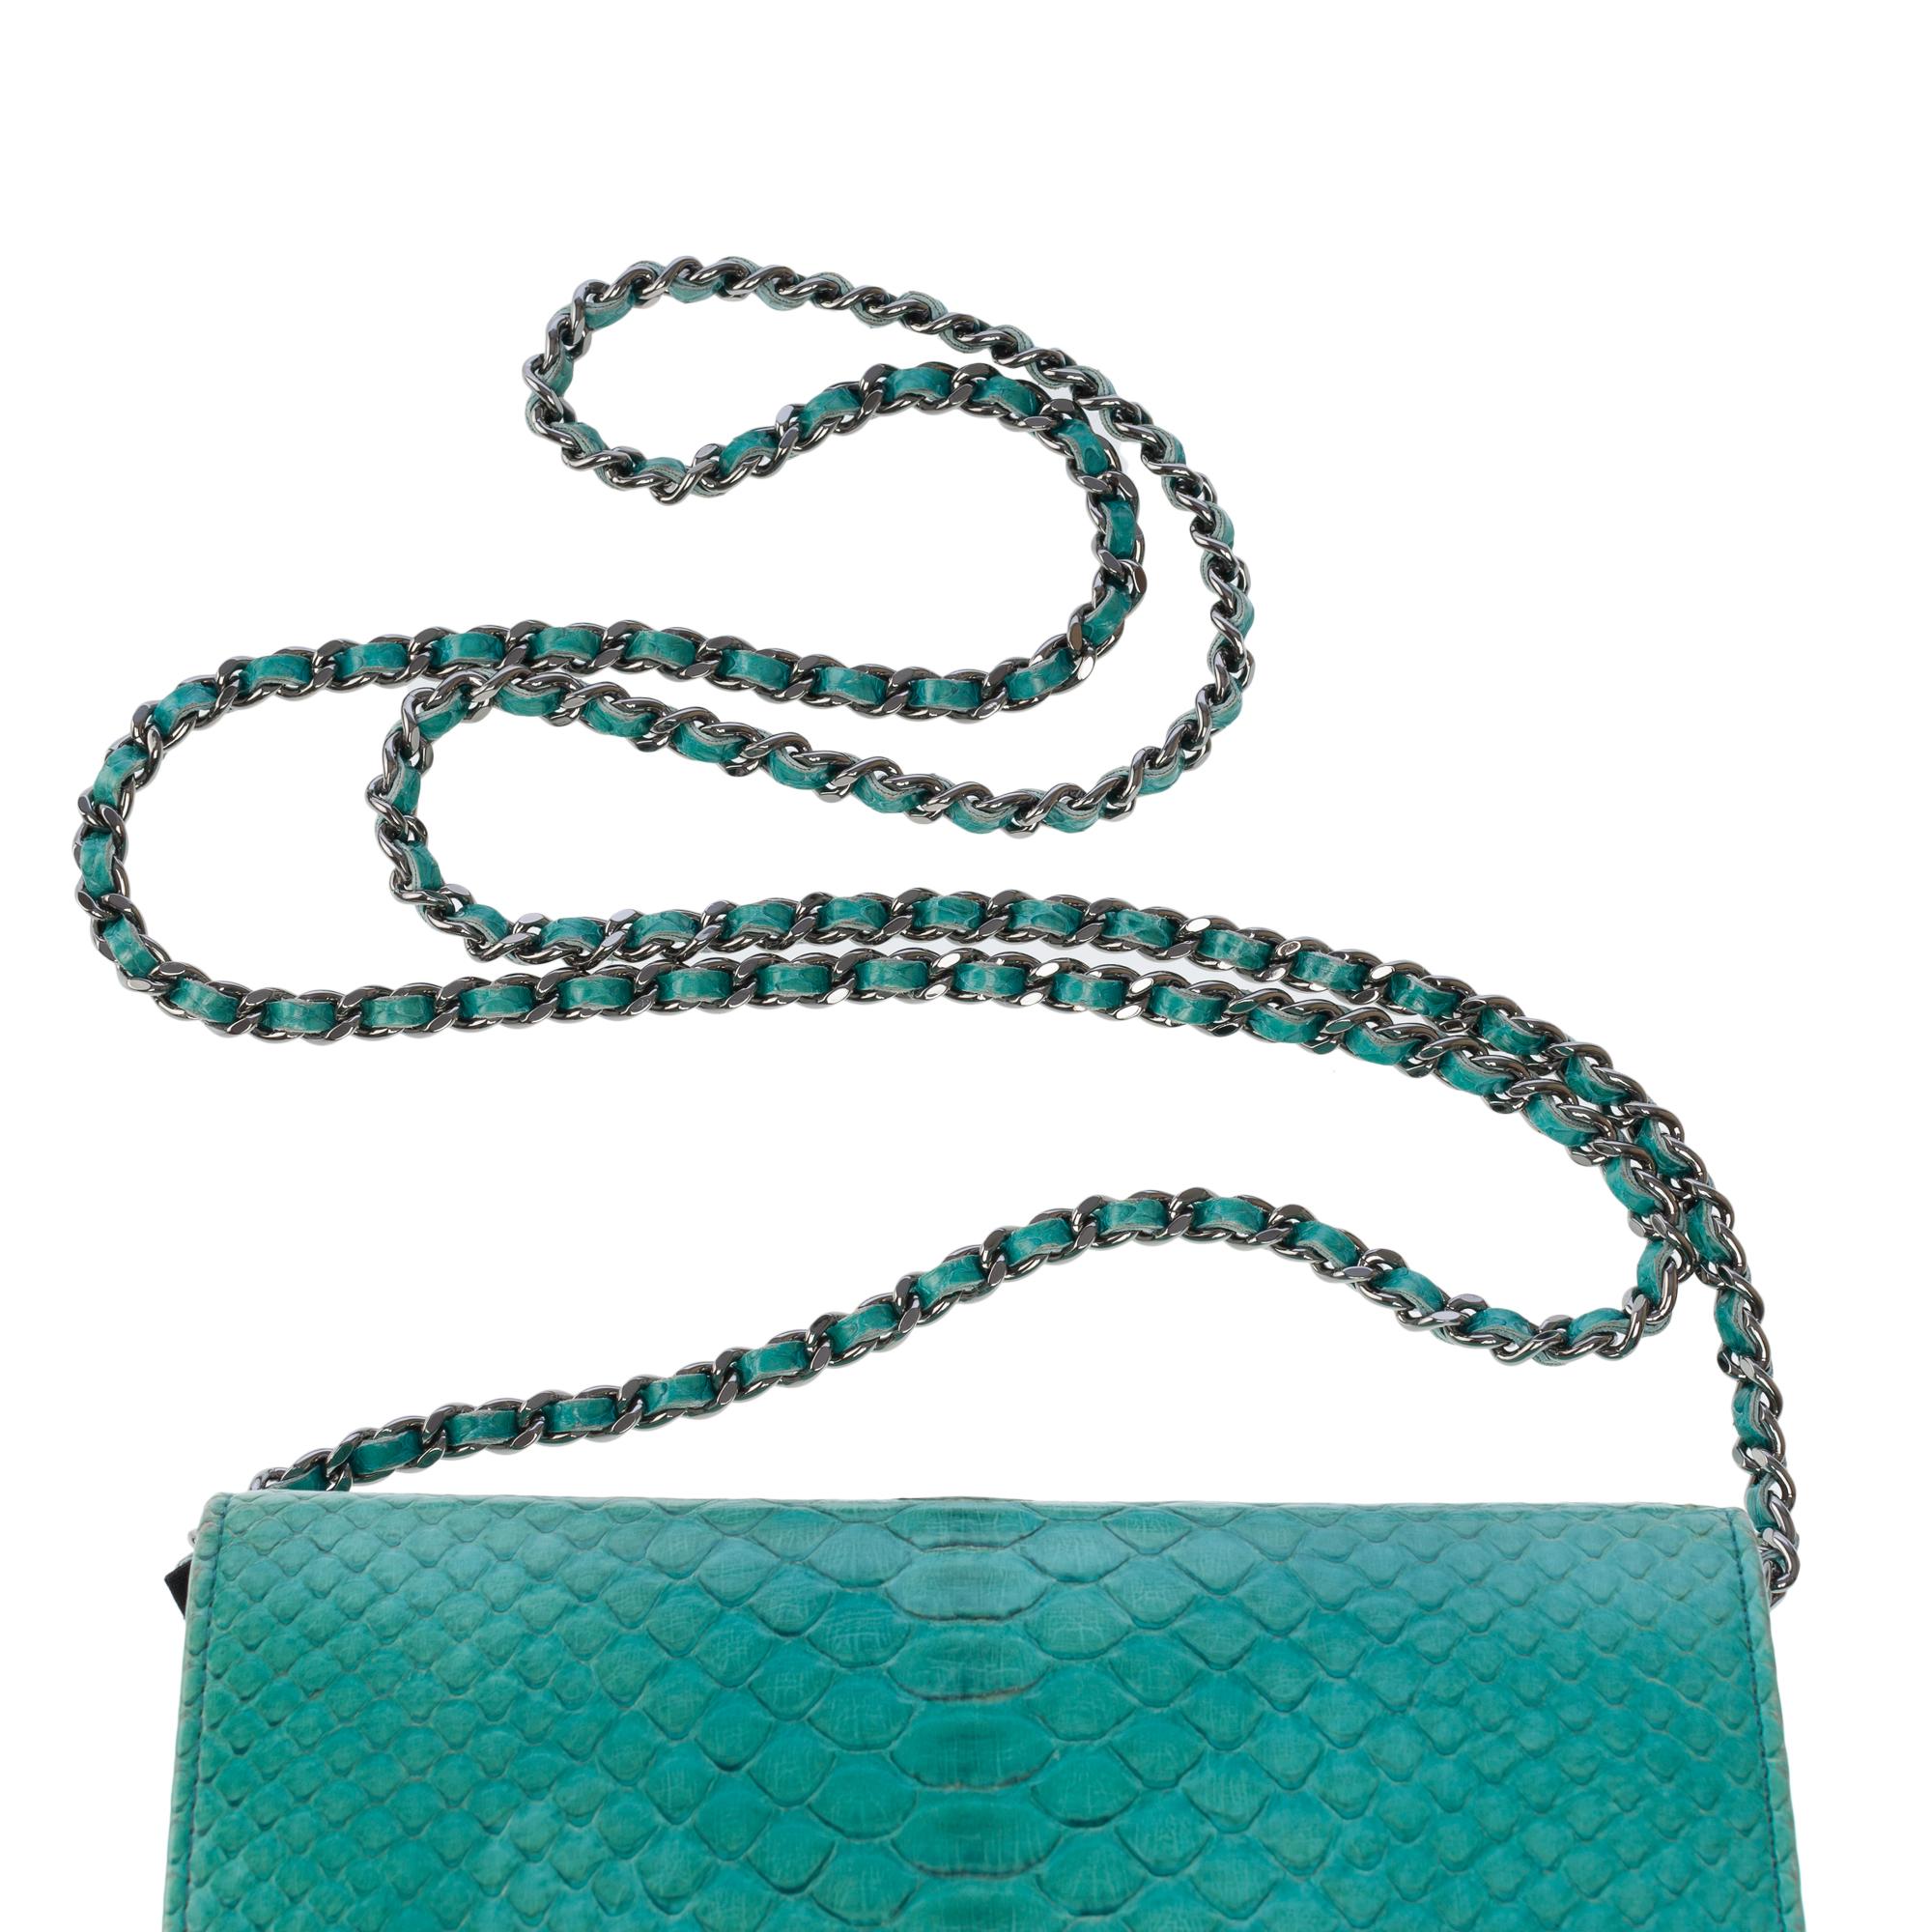 Chanel Wallet on Chain (WOC)  shoulder bag in Turquoise Blue Python leather, SHW 7